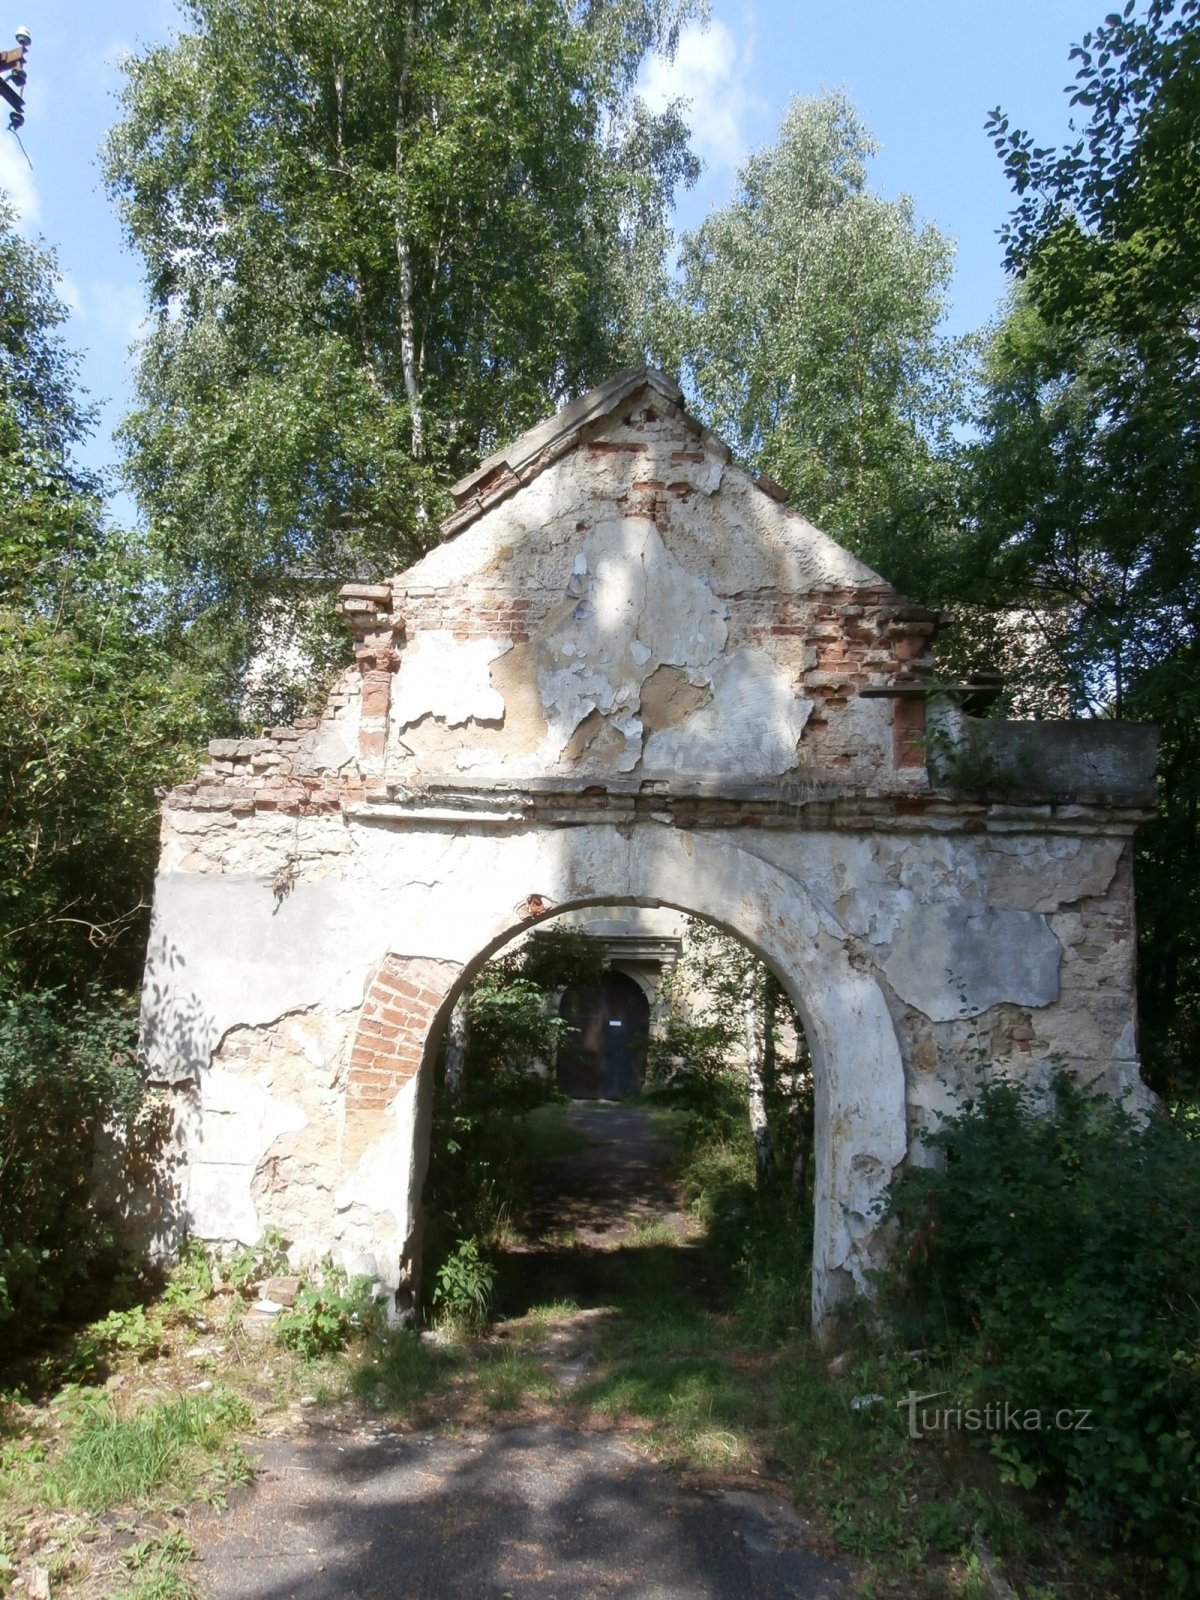 The gate to the fortress in Kuřívody